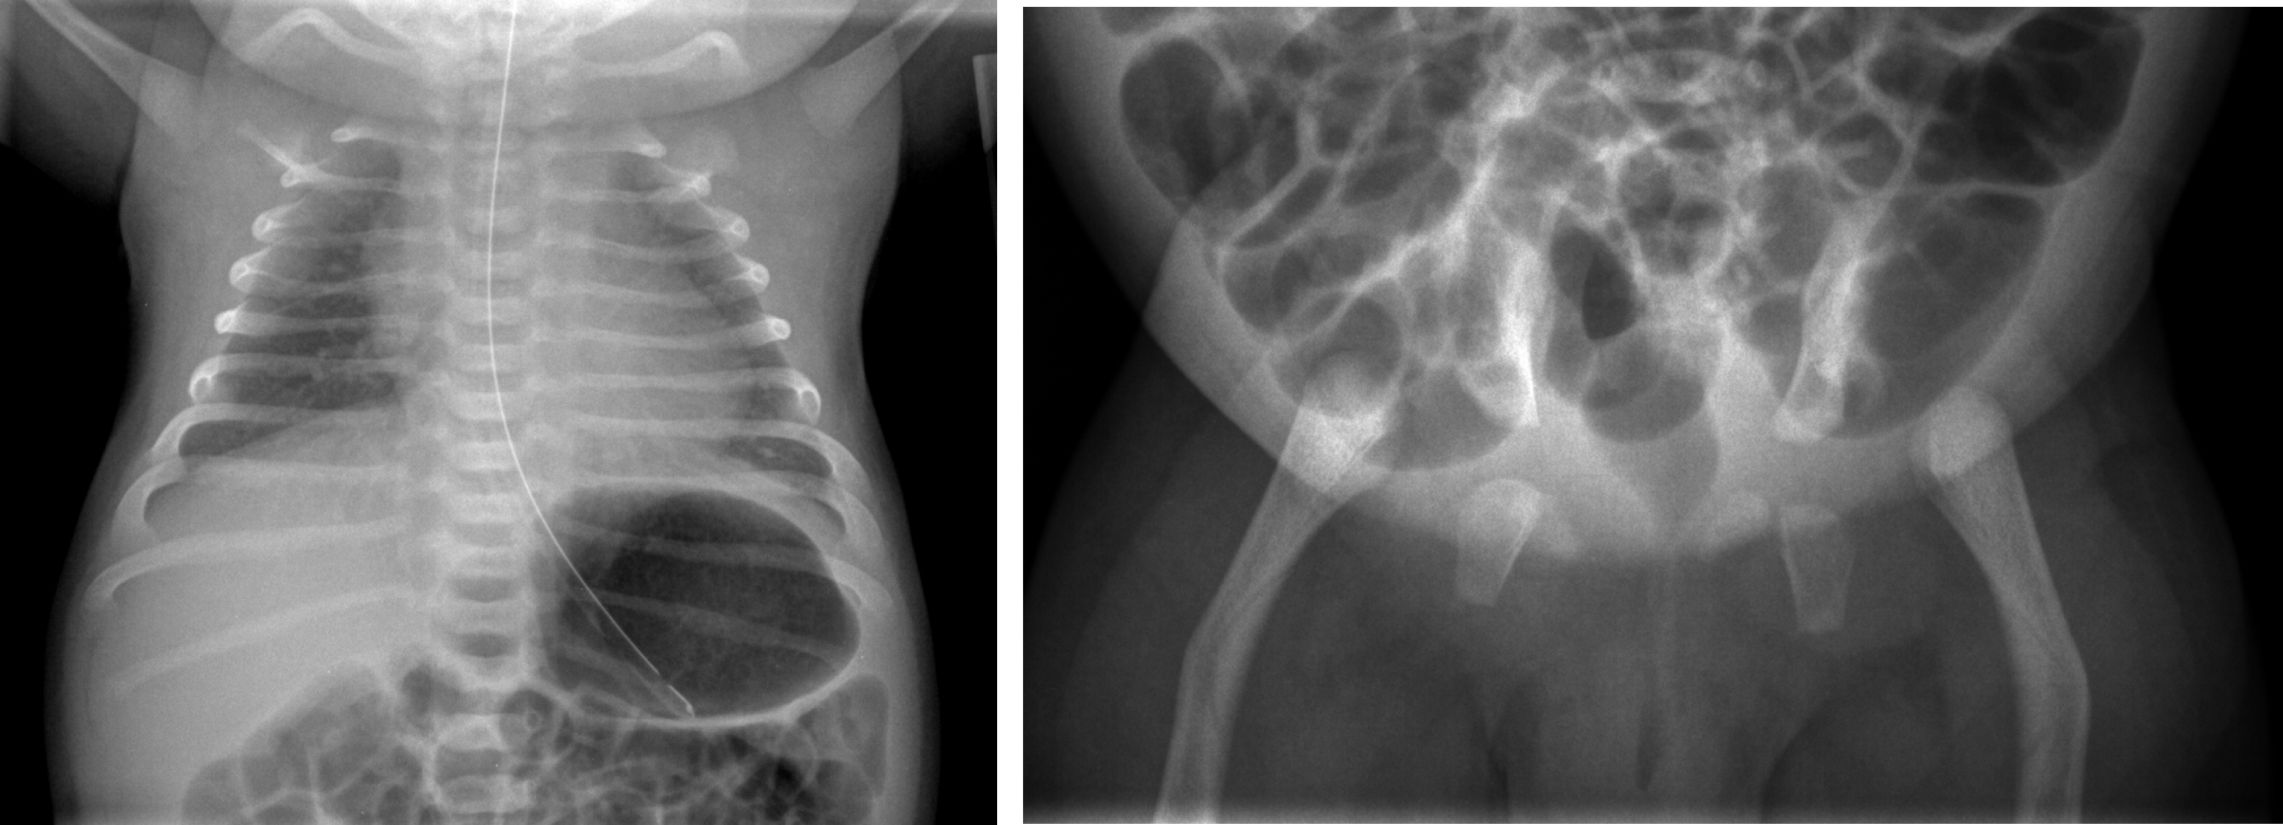 Figure 12. Campomelic dysplasia. bell-shaped thorax, hypoplastic scapula, bowed femurs, widely-spaced ischial bones.